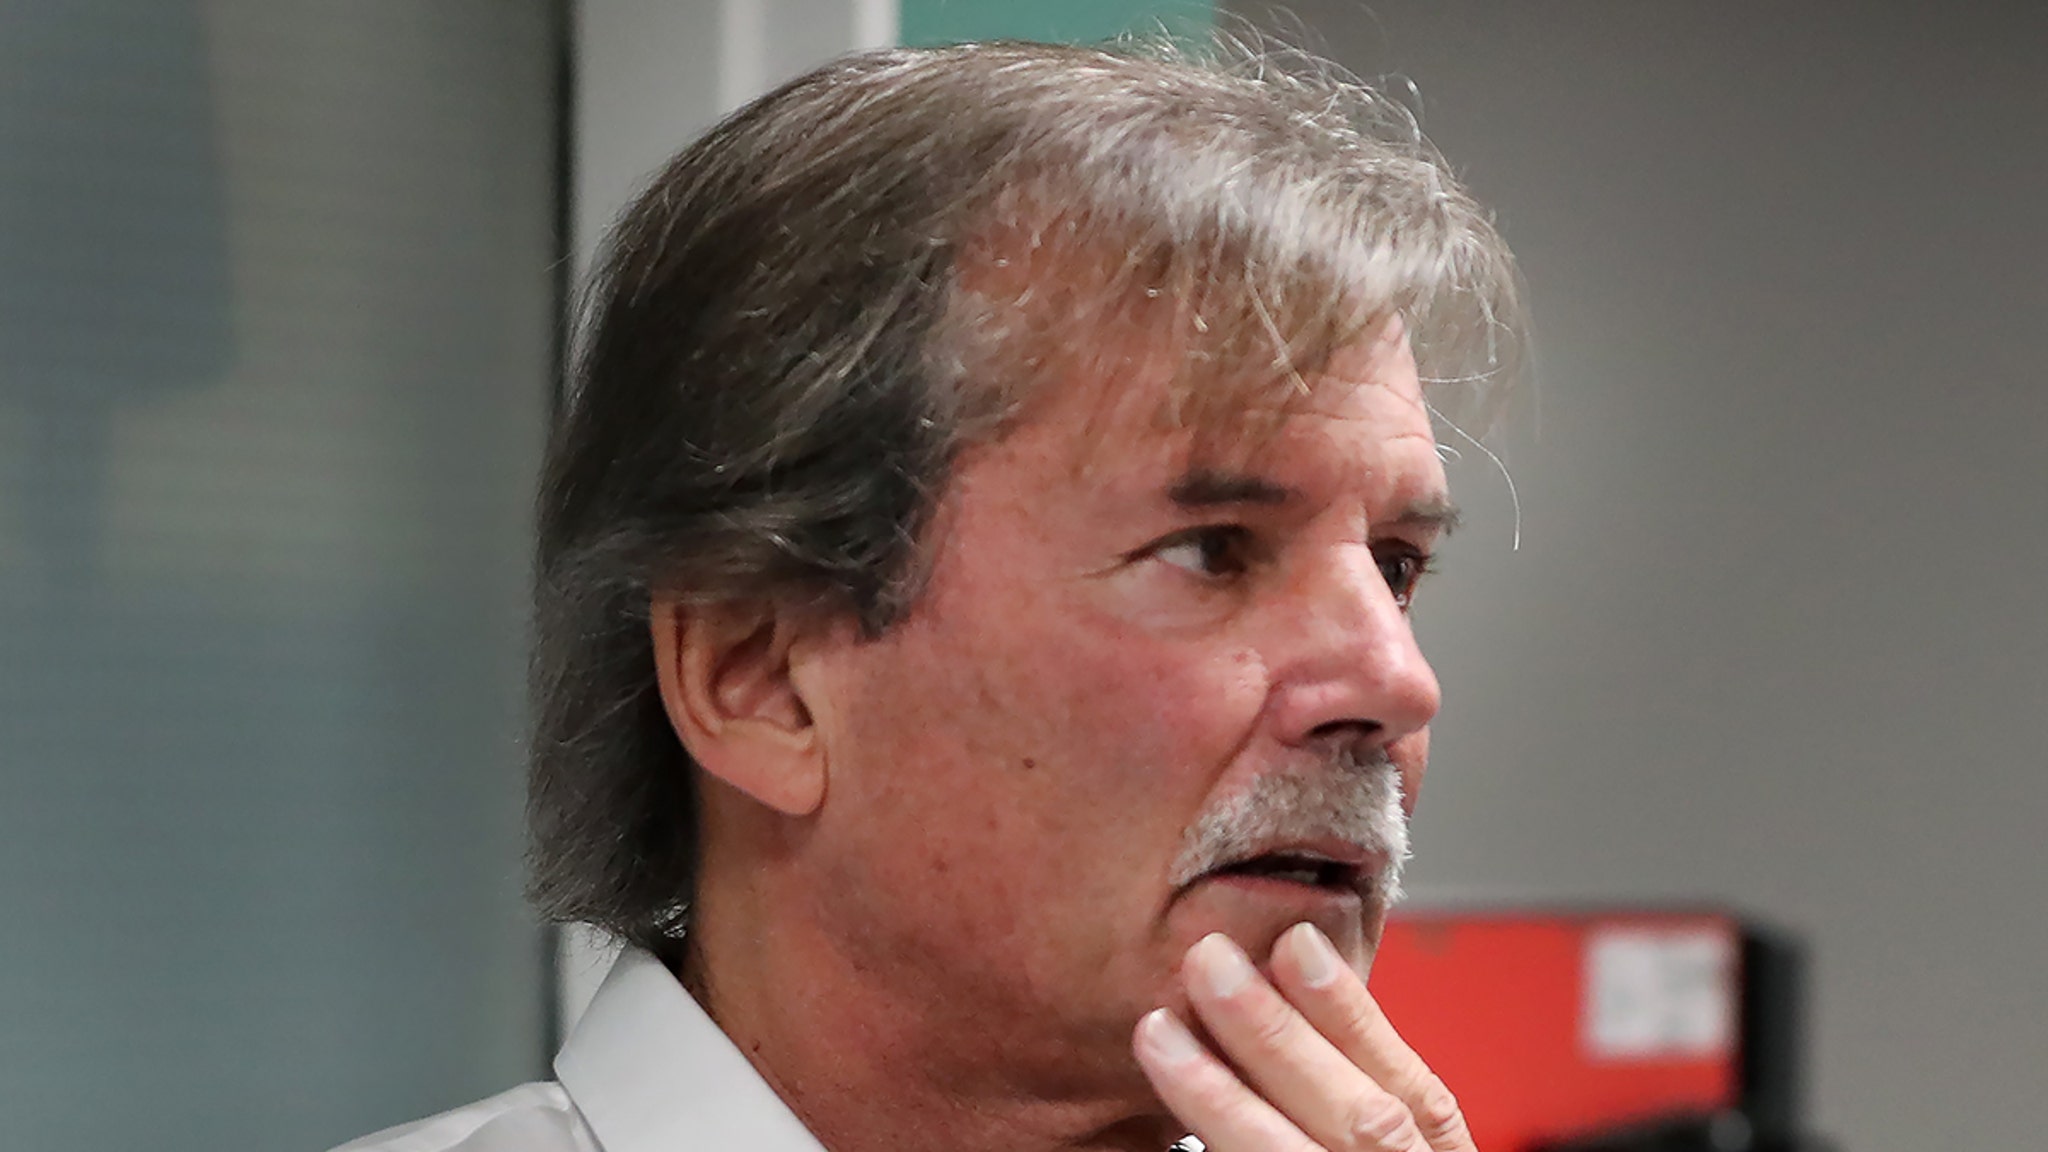 MLB News: Dennis Eckersley's adopted daughter busted after left